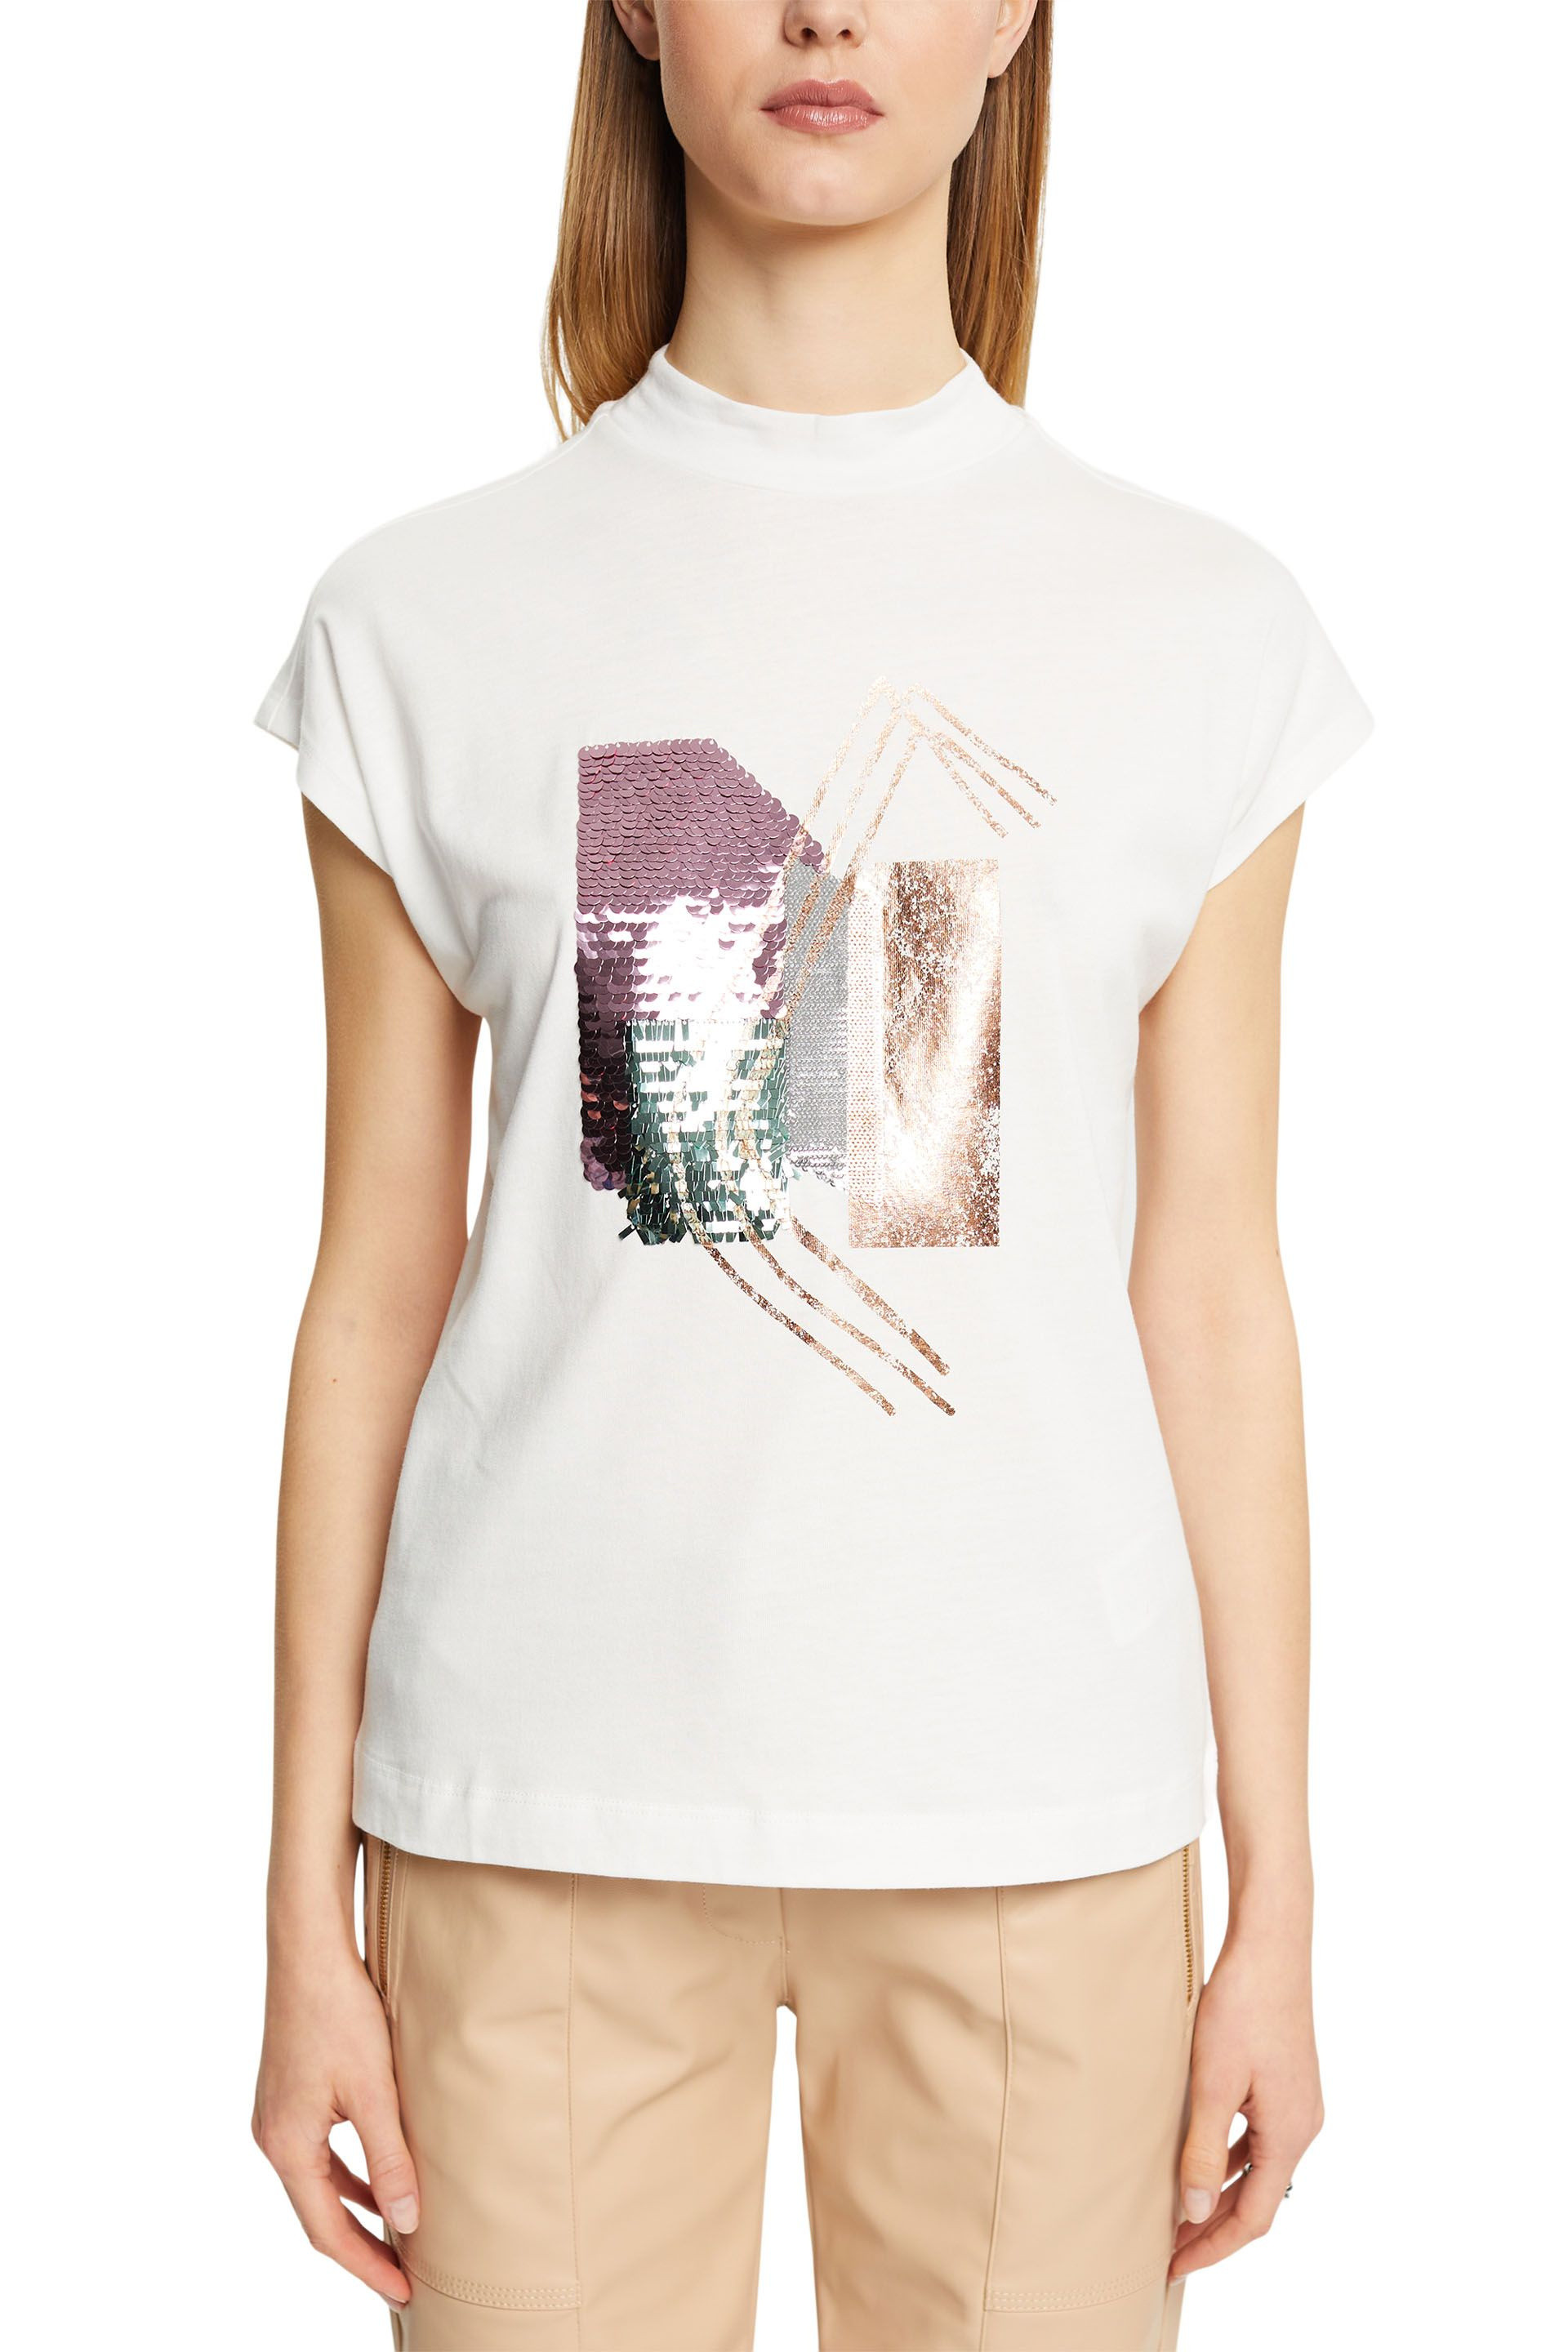 Esprit - T-shirt with sequins, White, large image number 1